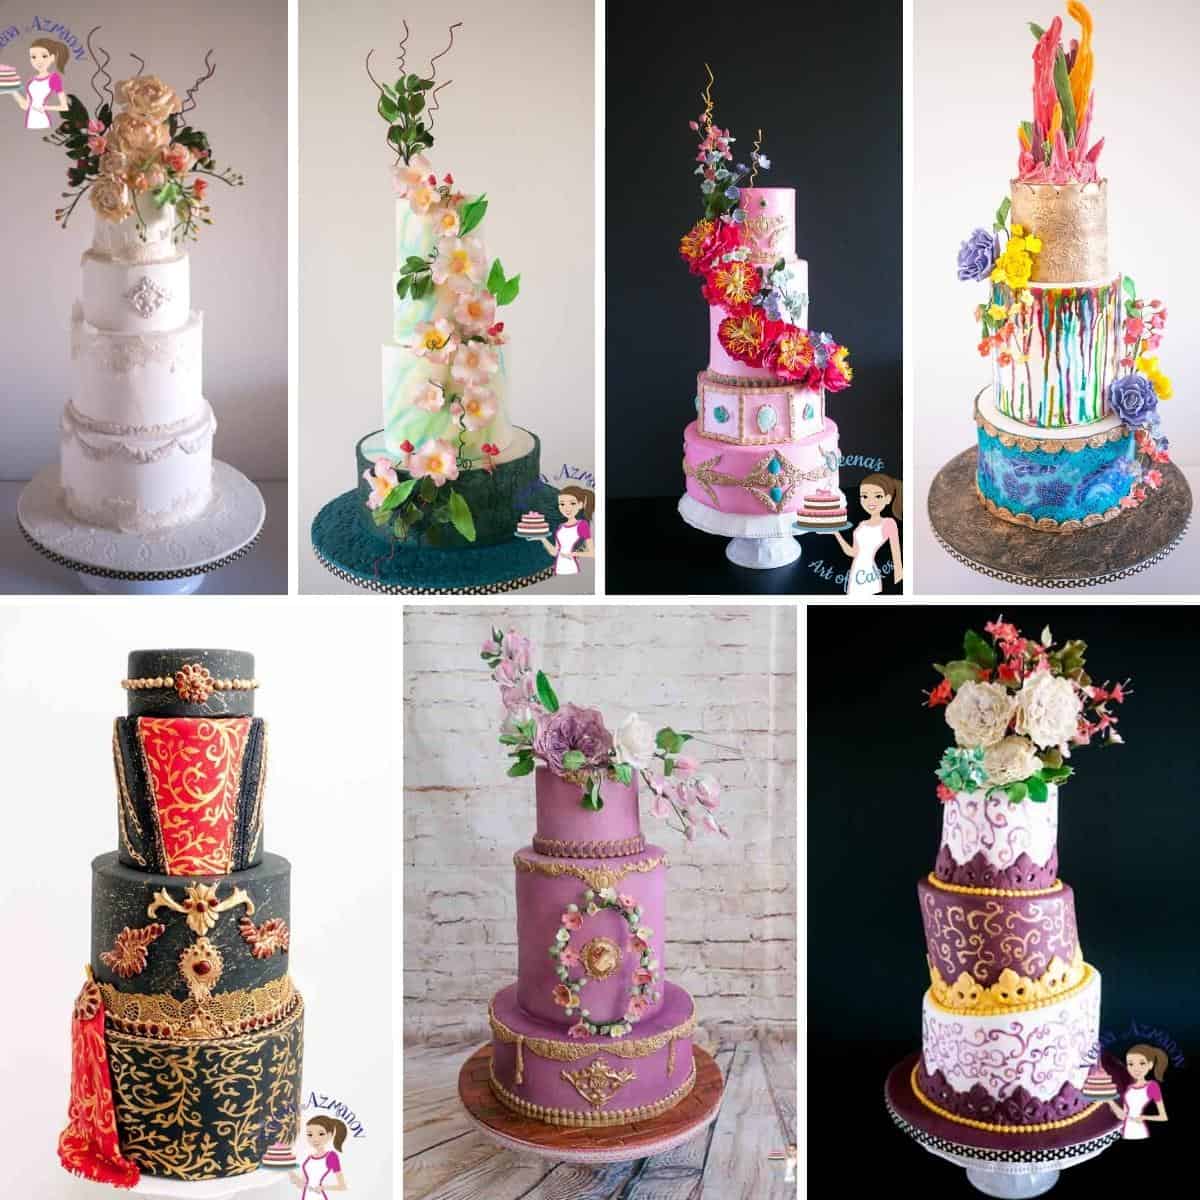 Ever Wonder? Cake Decorating as a Profession or Hobby?